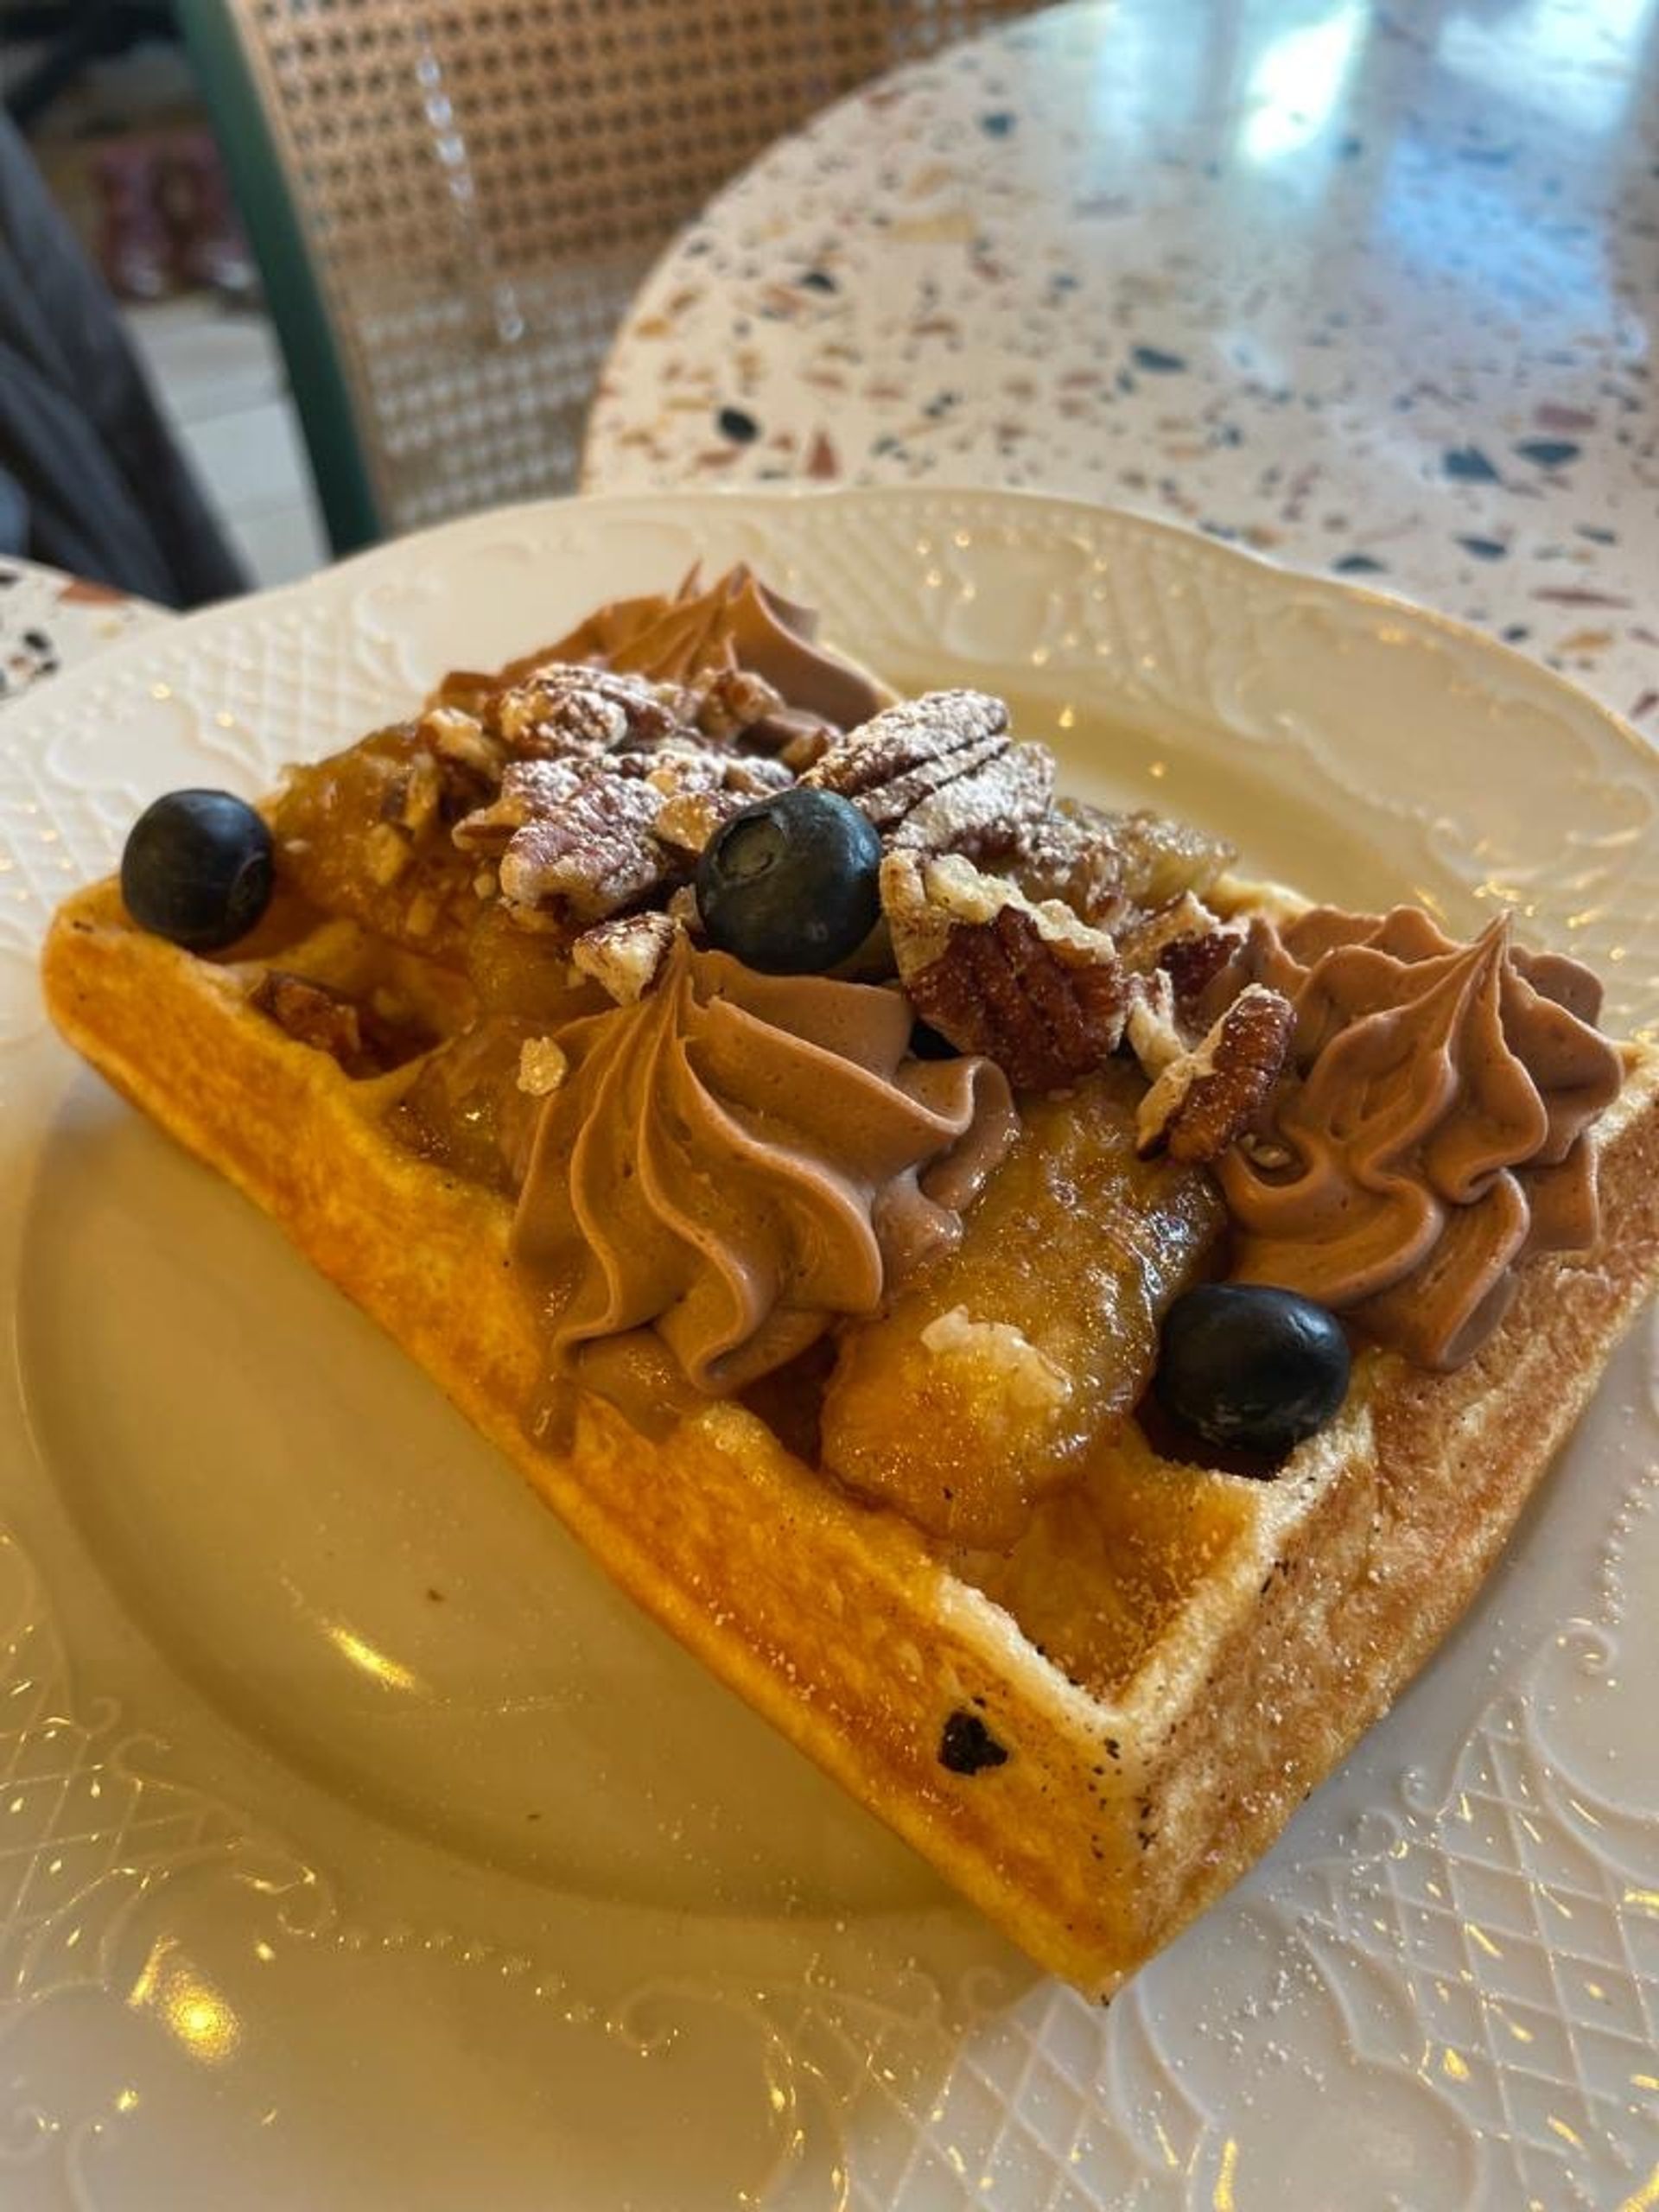 Waffle with jam, nuts, and blueberries.